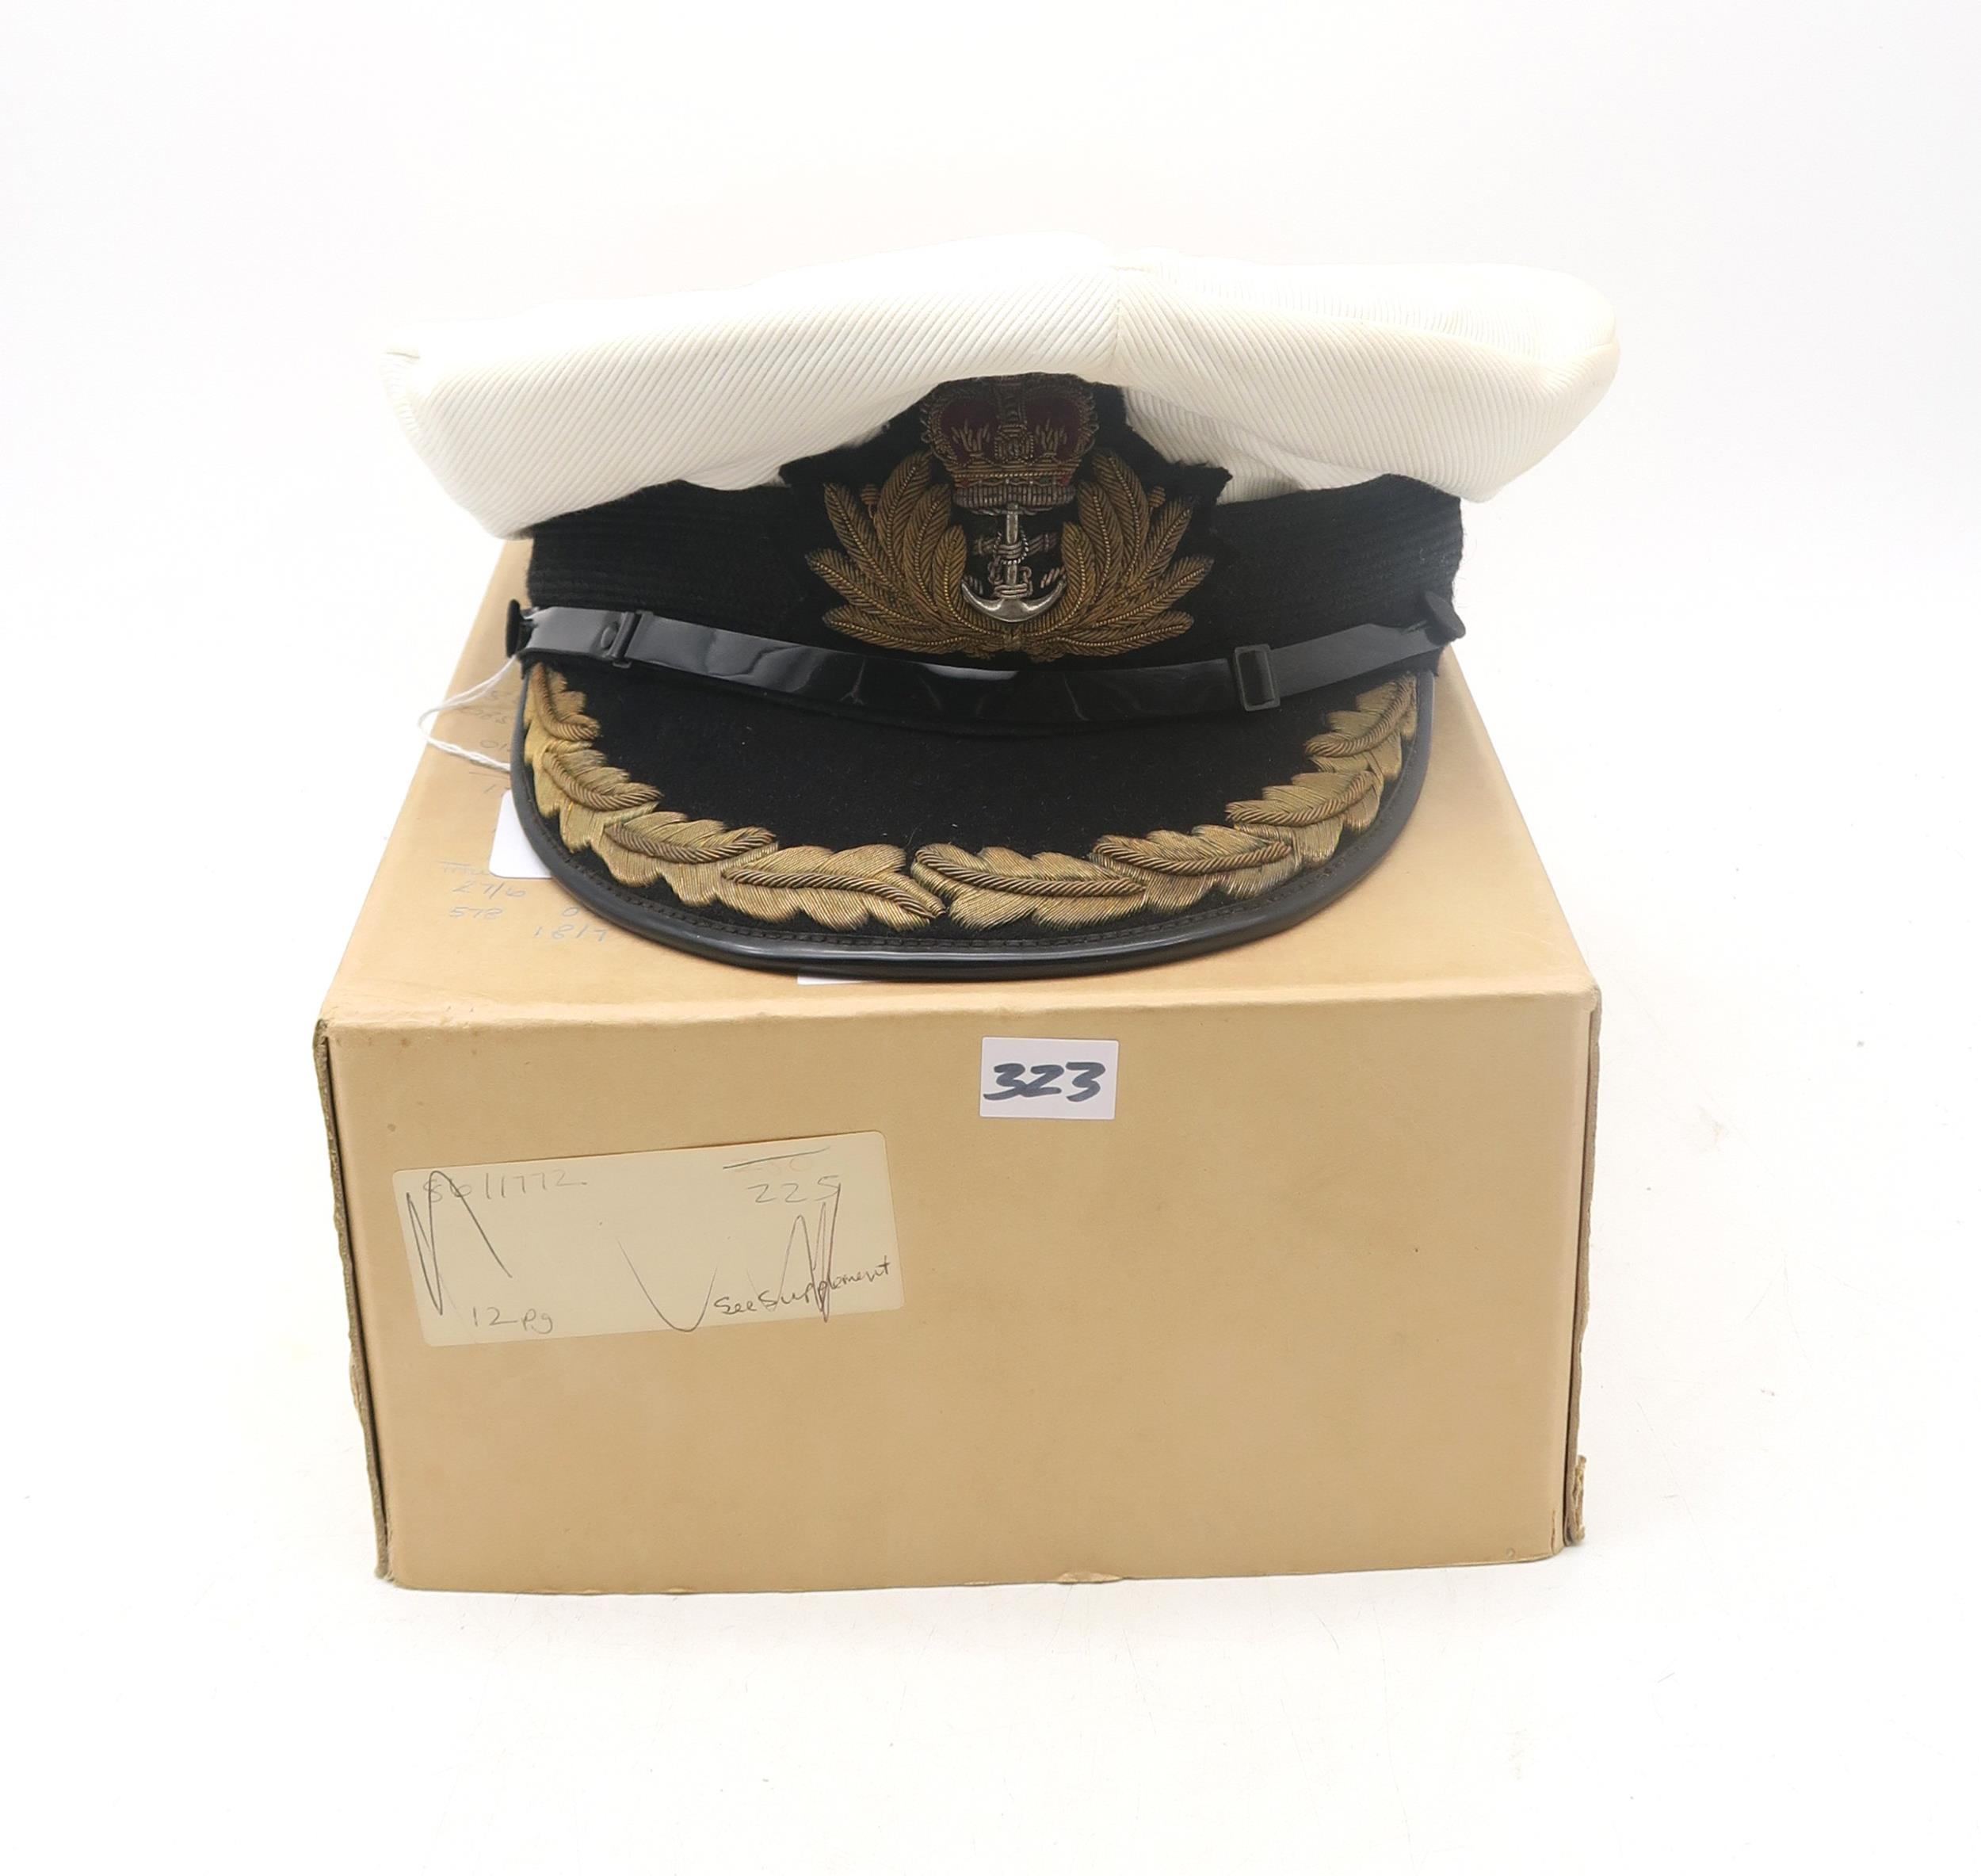 A post-War Royal Navy officer's cap by Gieves Ltd. of London, with bullion oak leaf embroidery to